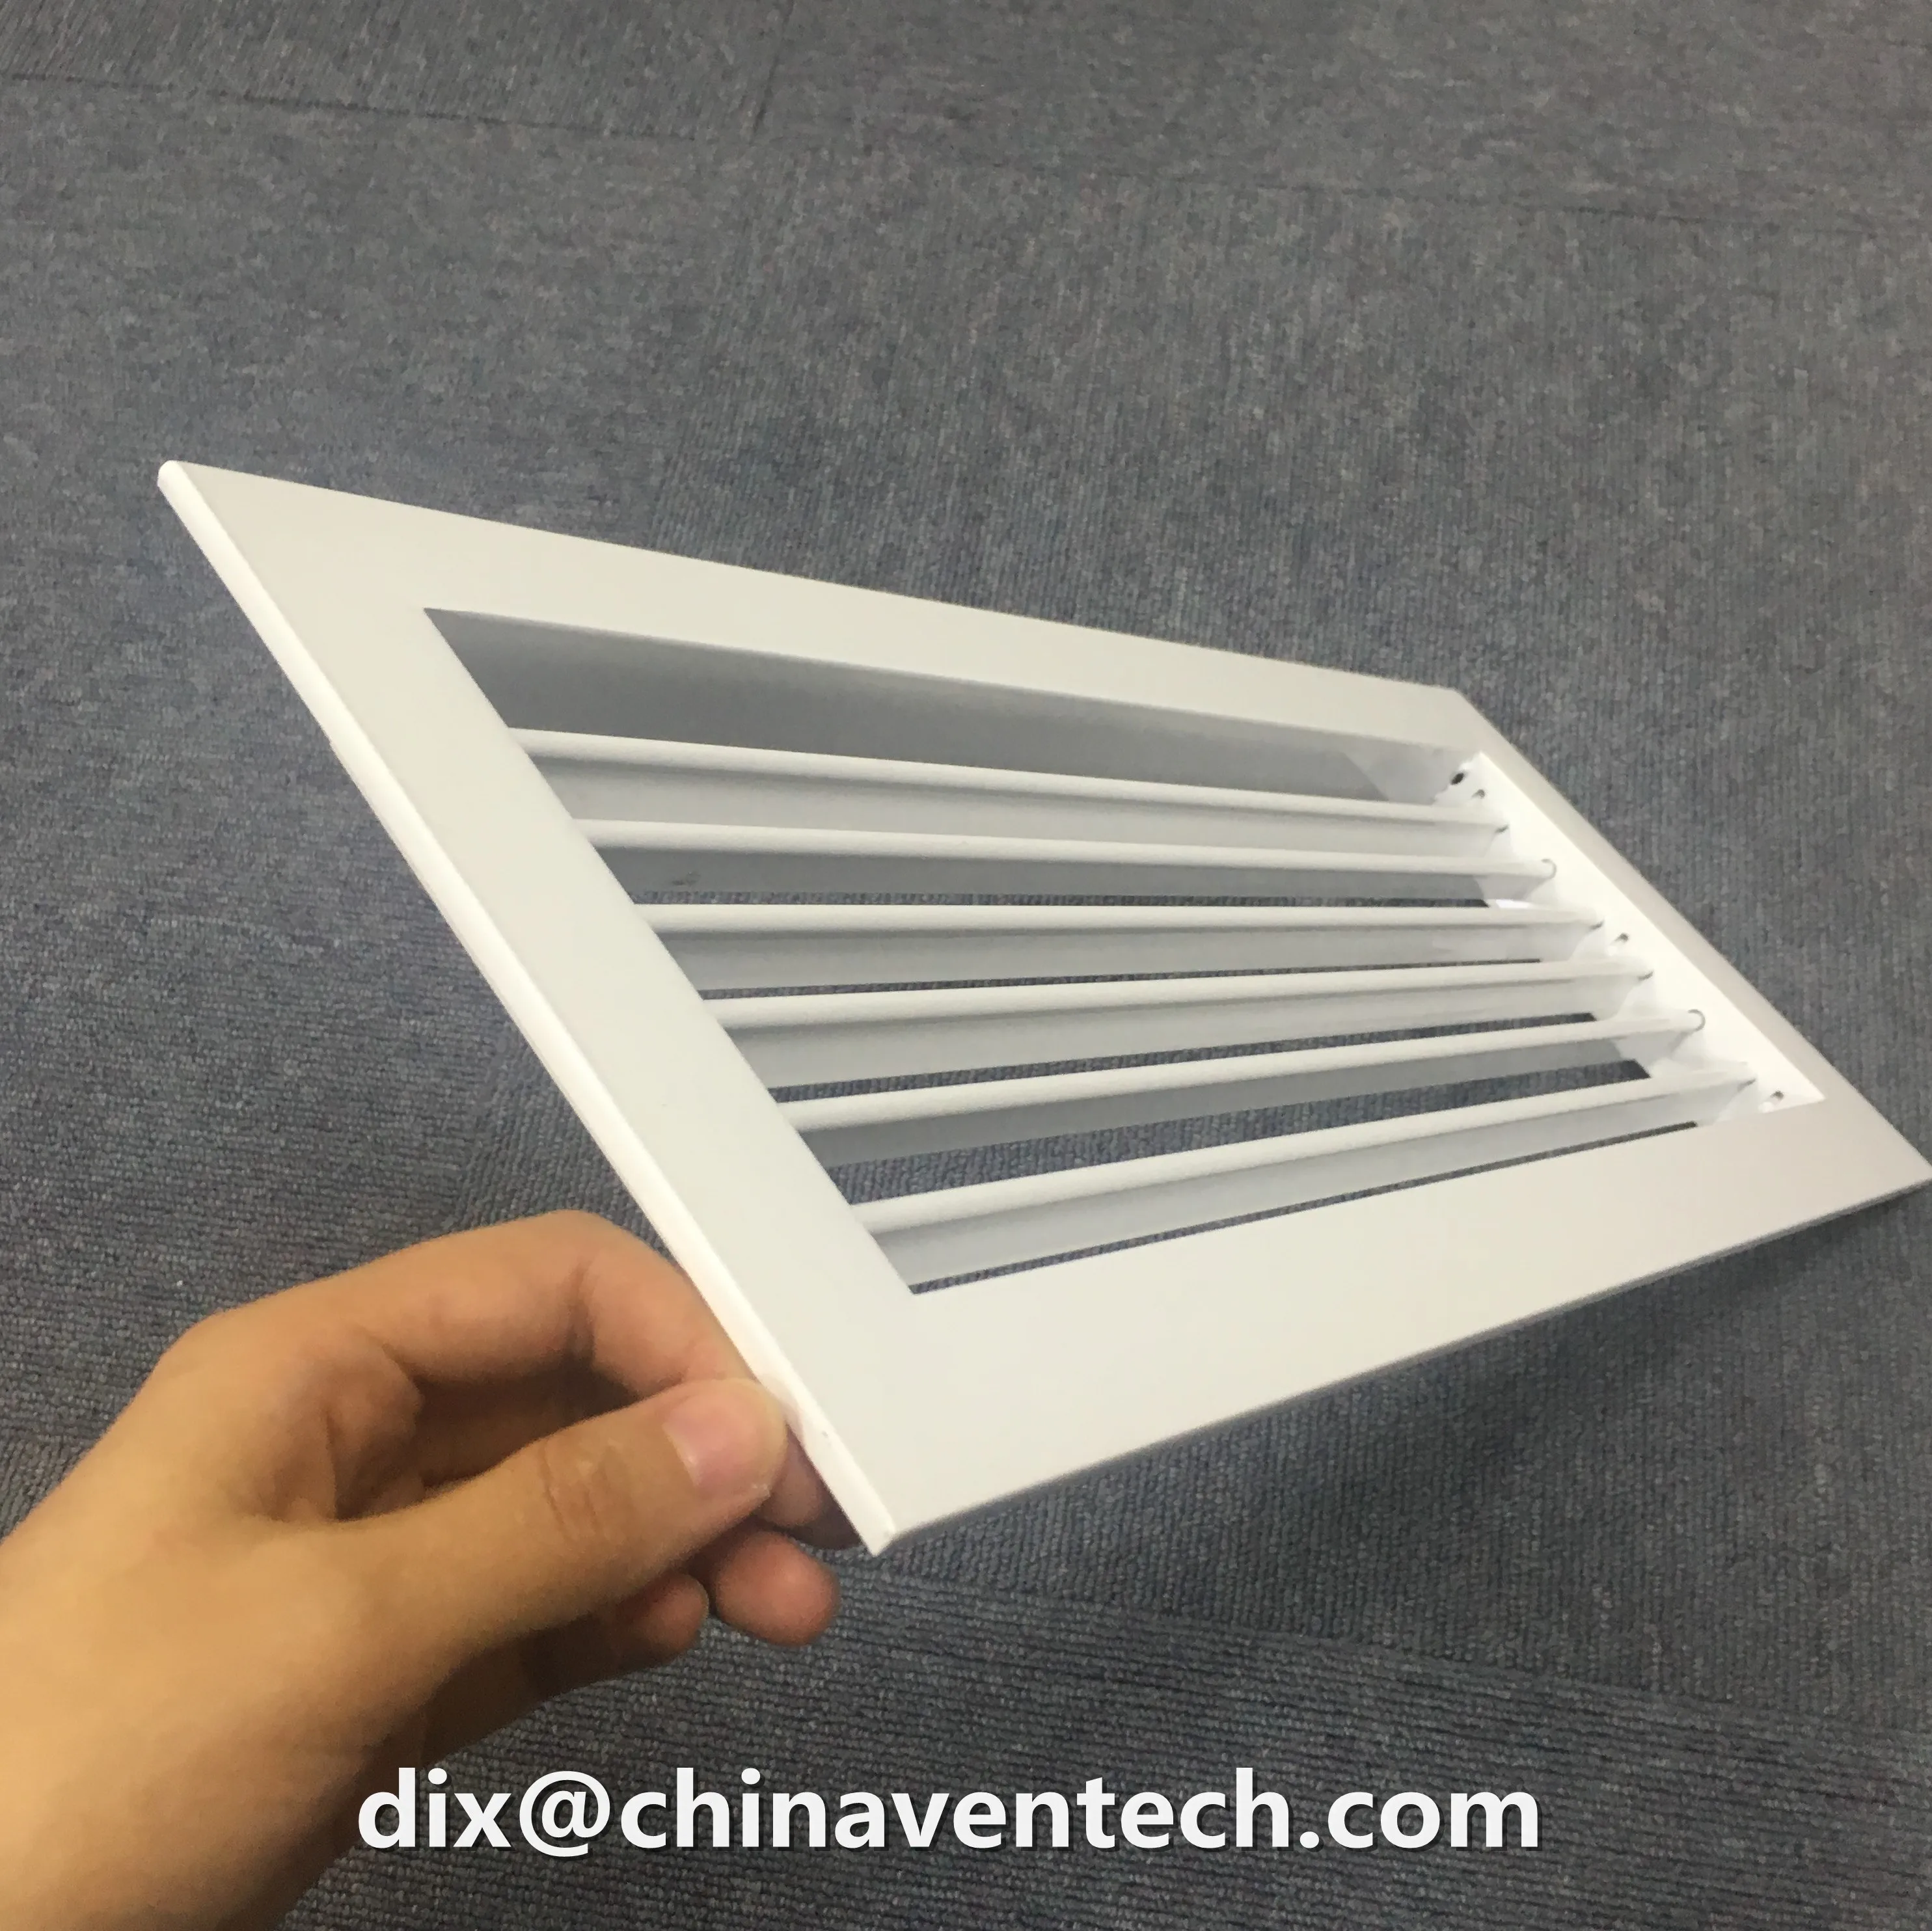 Hvac commercial project used air conditioner ceiling mounted double deflection supply grille